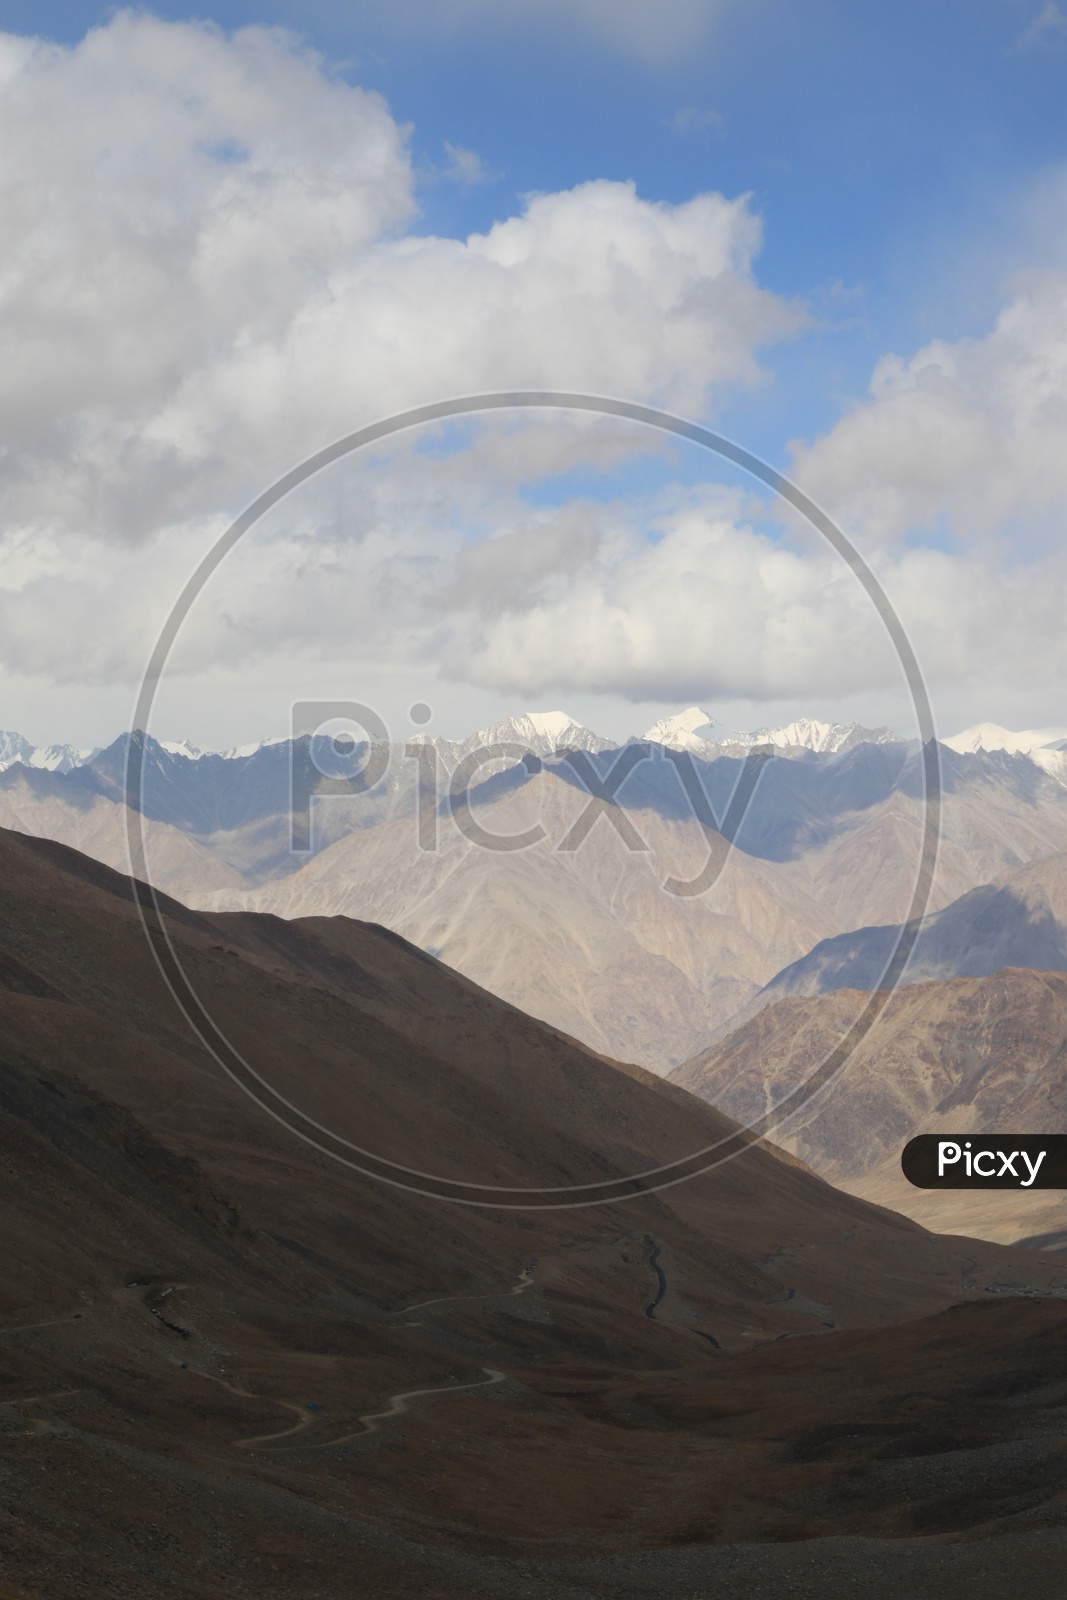 Roadways of leh with beautiful  snow cappedmountains in the background